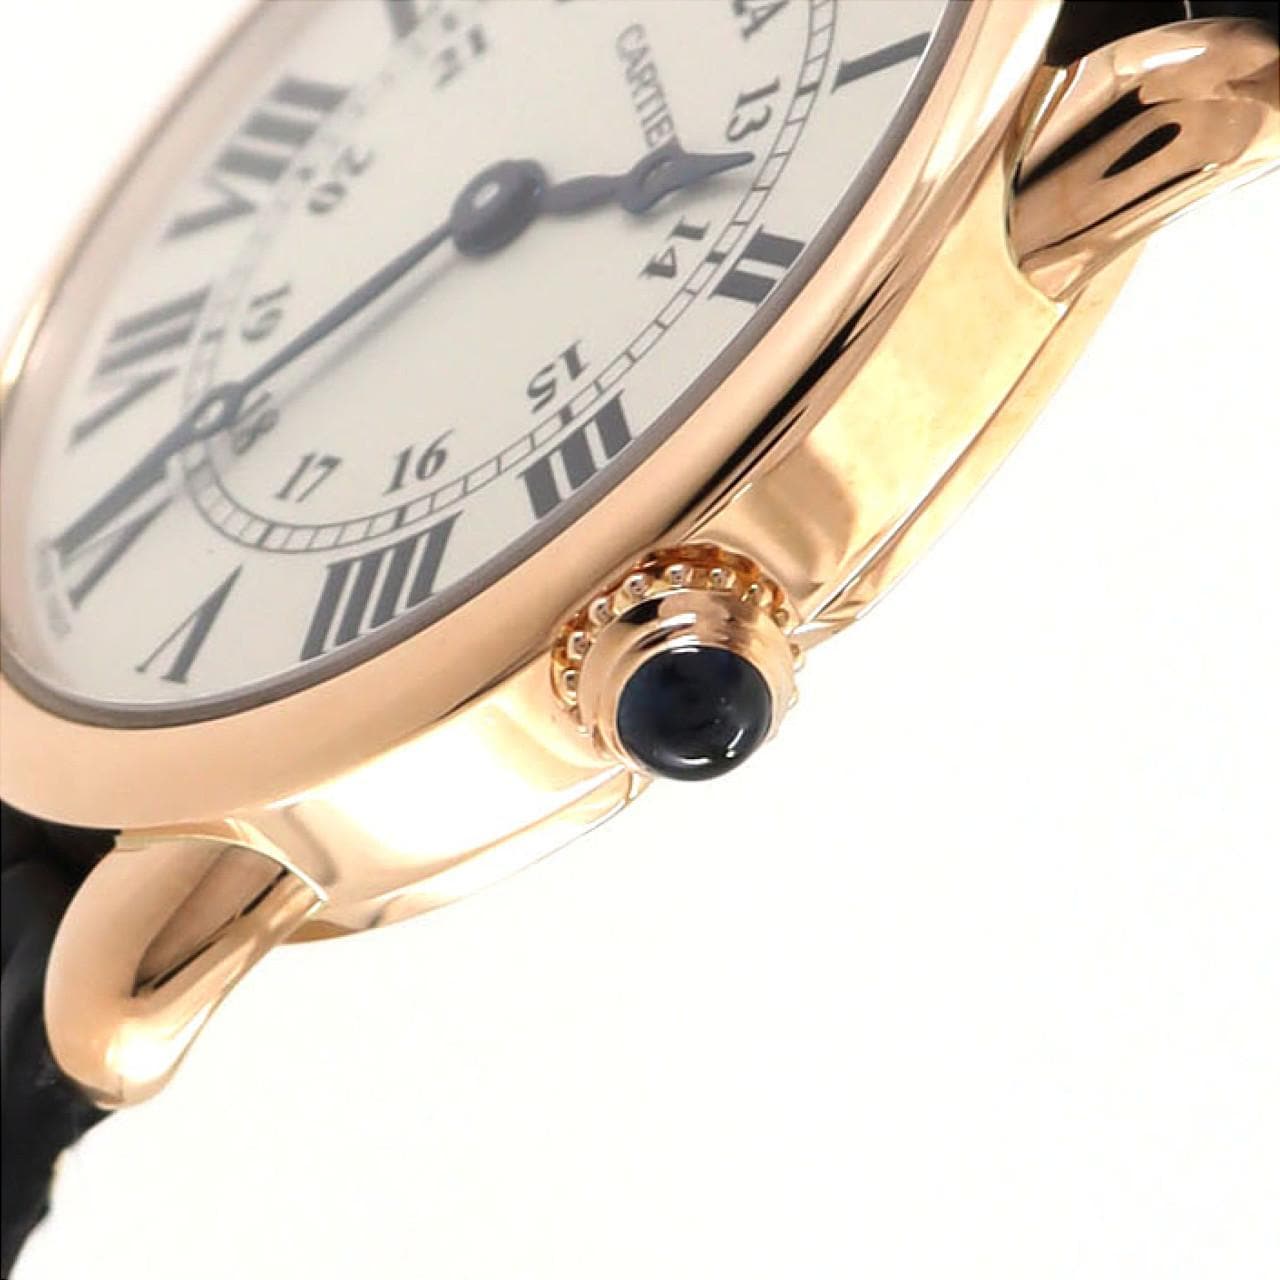 Cartier Ronde LC PG W6800151 PG/RG石英